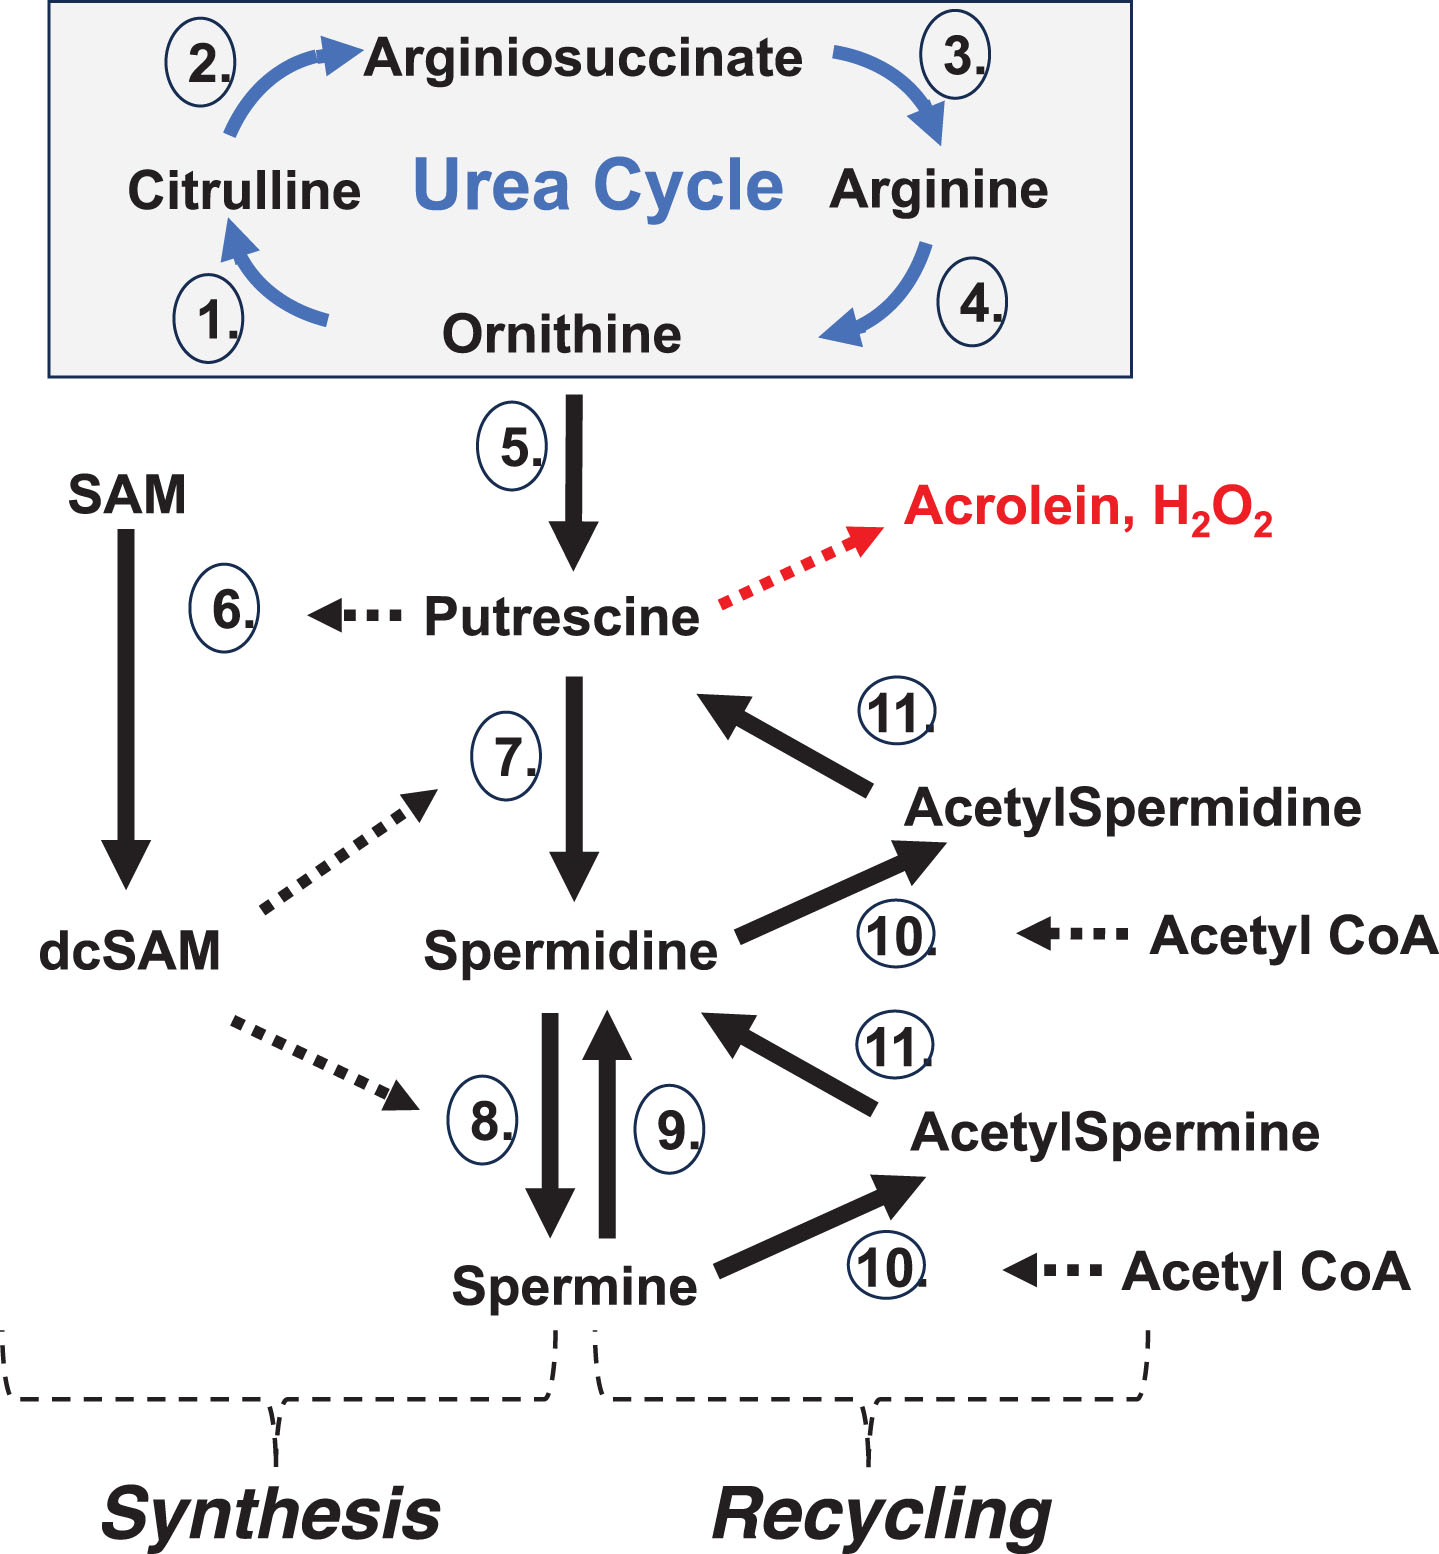 Polyamine Synthesis and Recycling. Synthesis: De novo polyamine synthesis begins with decarboxylation of ornithine (from the Urea Cycle) by ornithine decarboxylase (5.), which produces putrescine. Putrescine allosterically stimulates decarboxylation of S-adenosylmethionine (SAM) by SAM decarboxylase (6.) to create decarboxylated SAM (dcSAM). dcSAM then provides an aminopropyl group for the conversion of putrescine to spermidine by spermidine synthase (7.) and again for conversion of spermidine to spermine by spermine synthase (8.). ODC is tightly controlled with an ODC antizyme and rapid ODC RNA and protein turnover to control polyamine levels. Recycling: Further control of polyamine levels is exerted by acetylation of spermine and spermidine by spermidine/spermine N1 acetyltransferase (10.) using acetyl CoA and then polyamine oxidase (11.) converts the acetylated polyamine to the next lower form. Putrescine created by polyamine recycling can trigger further polyamine synthesis without using ODC since putrescine can allosterically stimulate AMD1 and serve as input to SRM. Spermine oxidase (9.) can provide rapid reduction of spermine levels. In addition, polyamine recycling can generate harmful hydrogen peroxide and acrolein. Enzymes:1. Ornithine Transcarbamylase (OTC); 2. Argininosuccinate Synthetase 1 (ASS1); 3. Argininosuccinate Lyase (ASL); 4. Arginase 1 (ARG1); 5. Ornithine Decarboxylase (ODC); 6. S-Adenosylmethionine Decarboxylase 1 (AMD1); 7. Spermidine Synthase (SRM); 8. Spermine Synthase (SMS); 9. Spermine Oxidase (SMOX); 10. Spermidine/Spermine N1 Acetyltransferase 1 (SAT1); 11. Polyamine Oxidase (PAO).